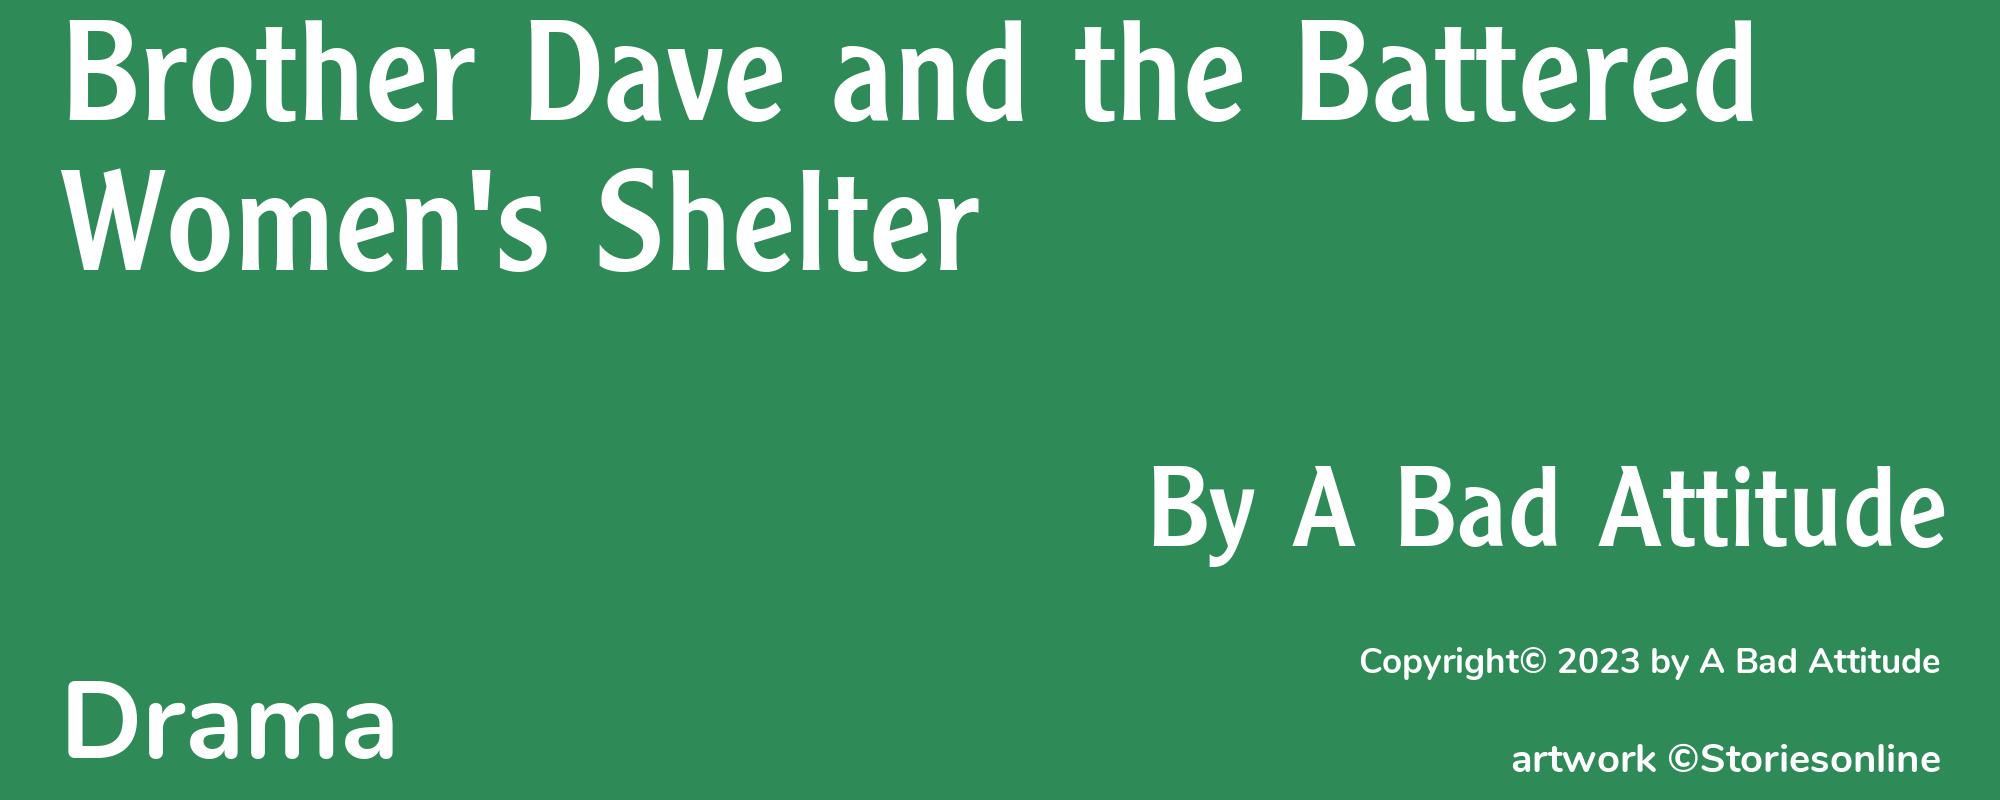 Brother Dave and the Battered Women's Shelter - Cover